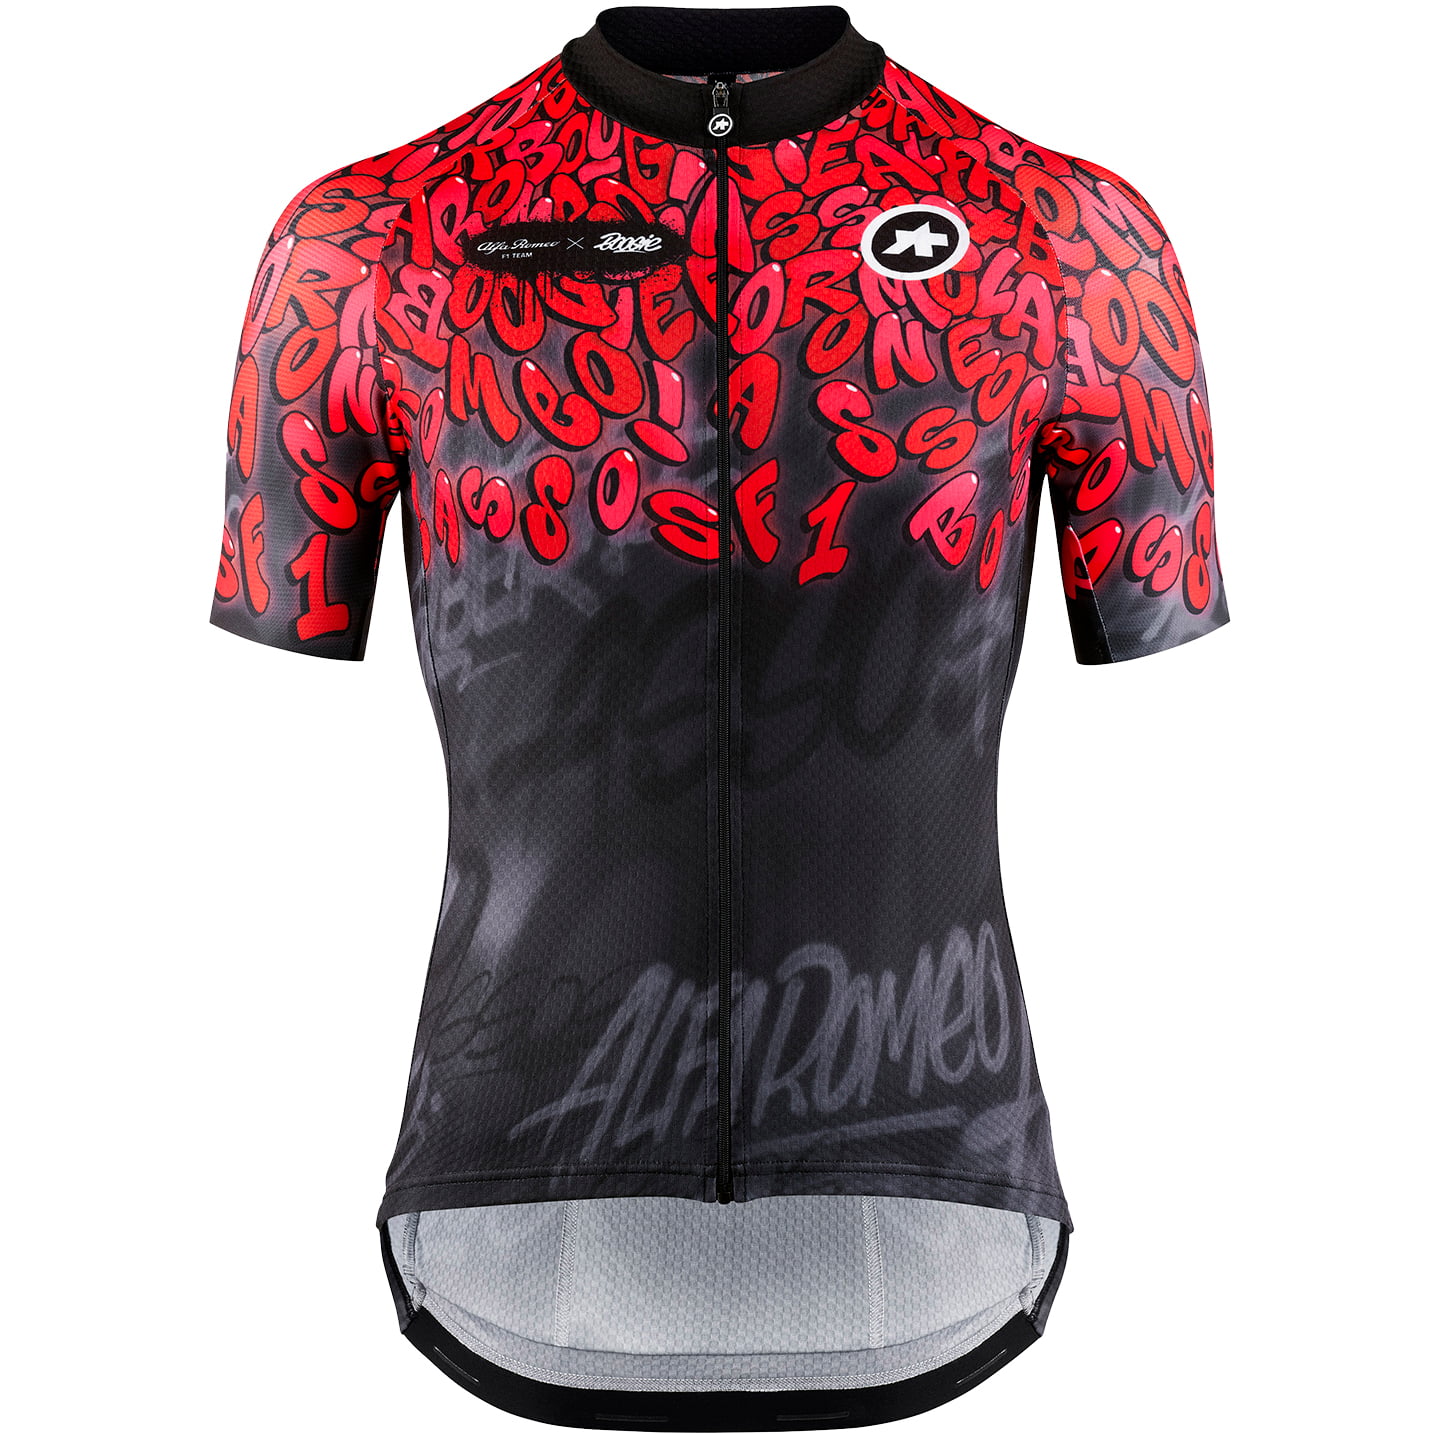 ASSOS Mille GTS C2 Alfa Romeo Short Sleeve Jersey Short Sleeve Jersey, for men, size 2XL, Cycling jersey, Cycle clothing